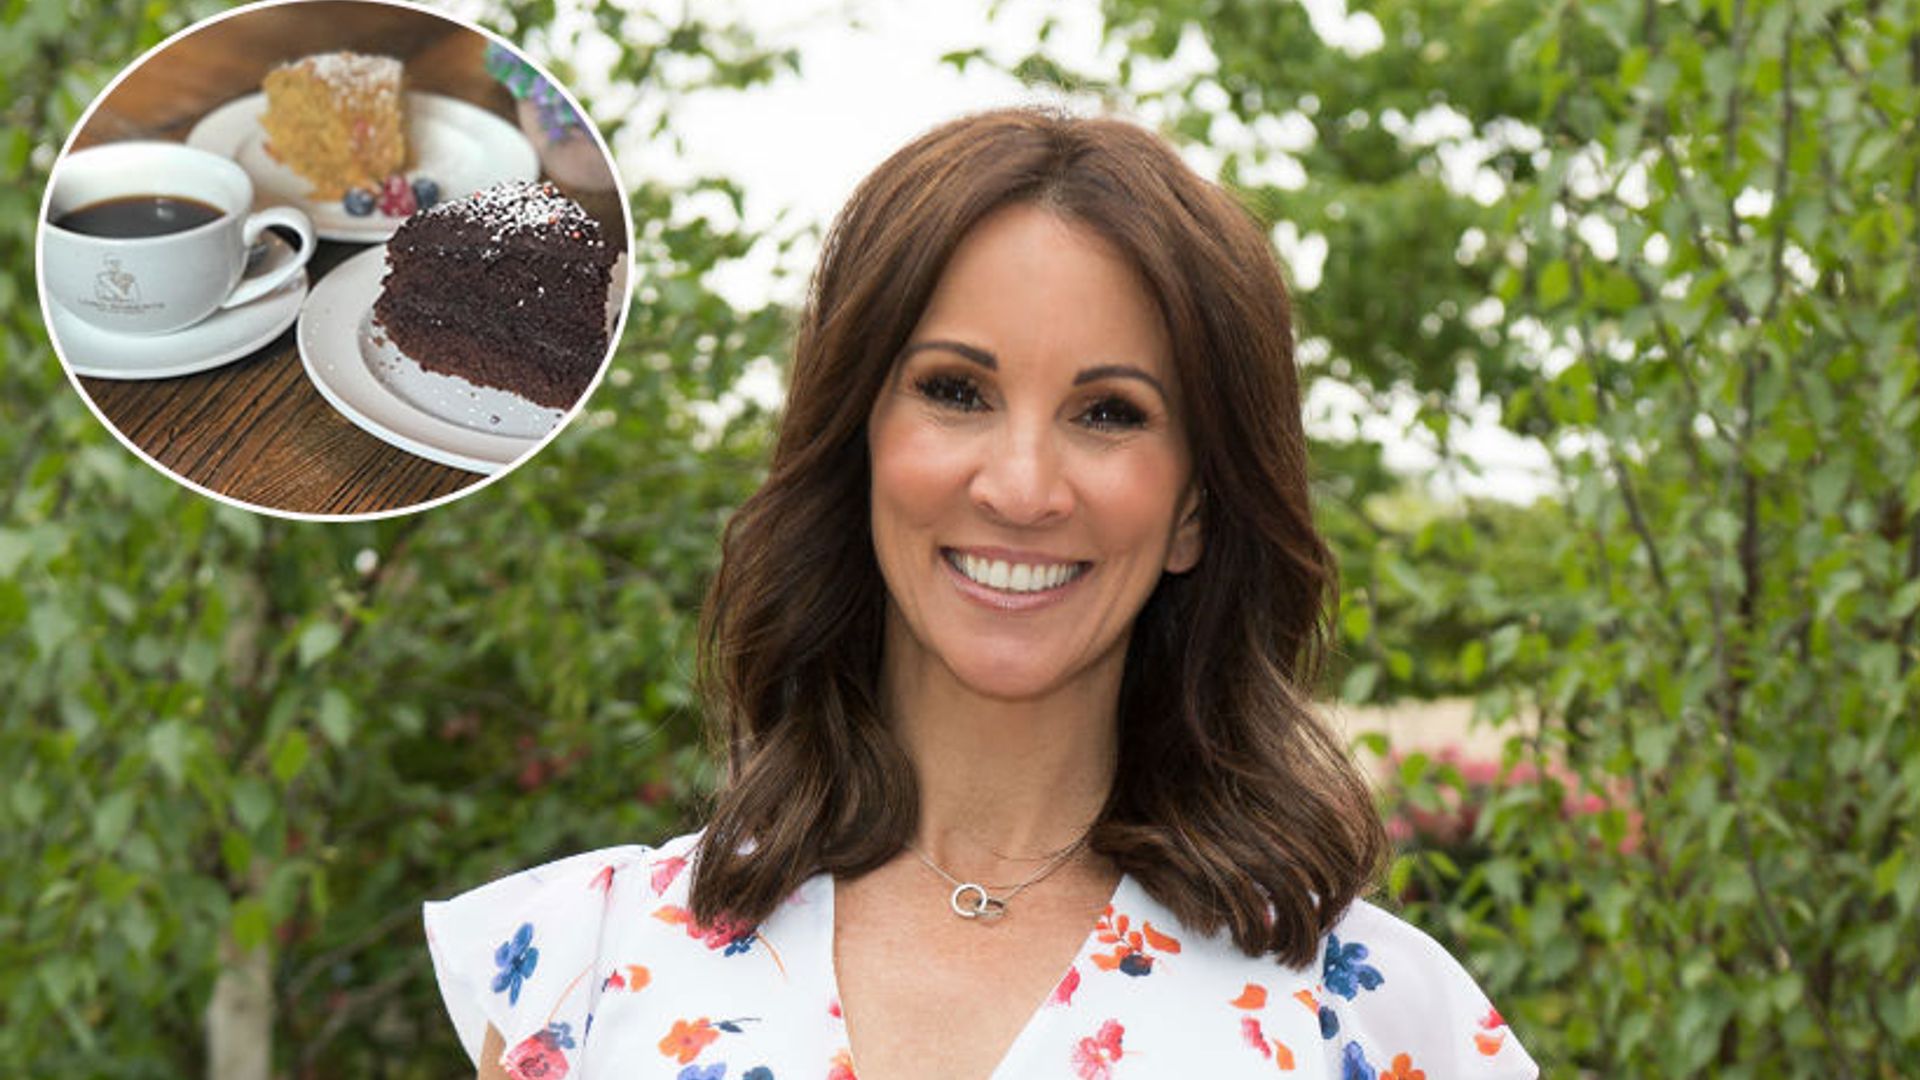 Andrea-McLean-cafe